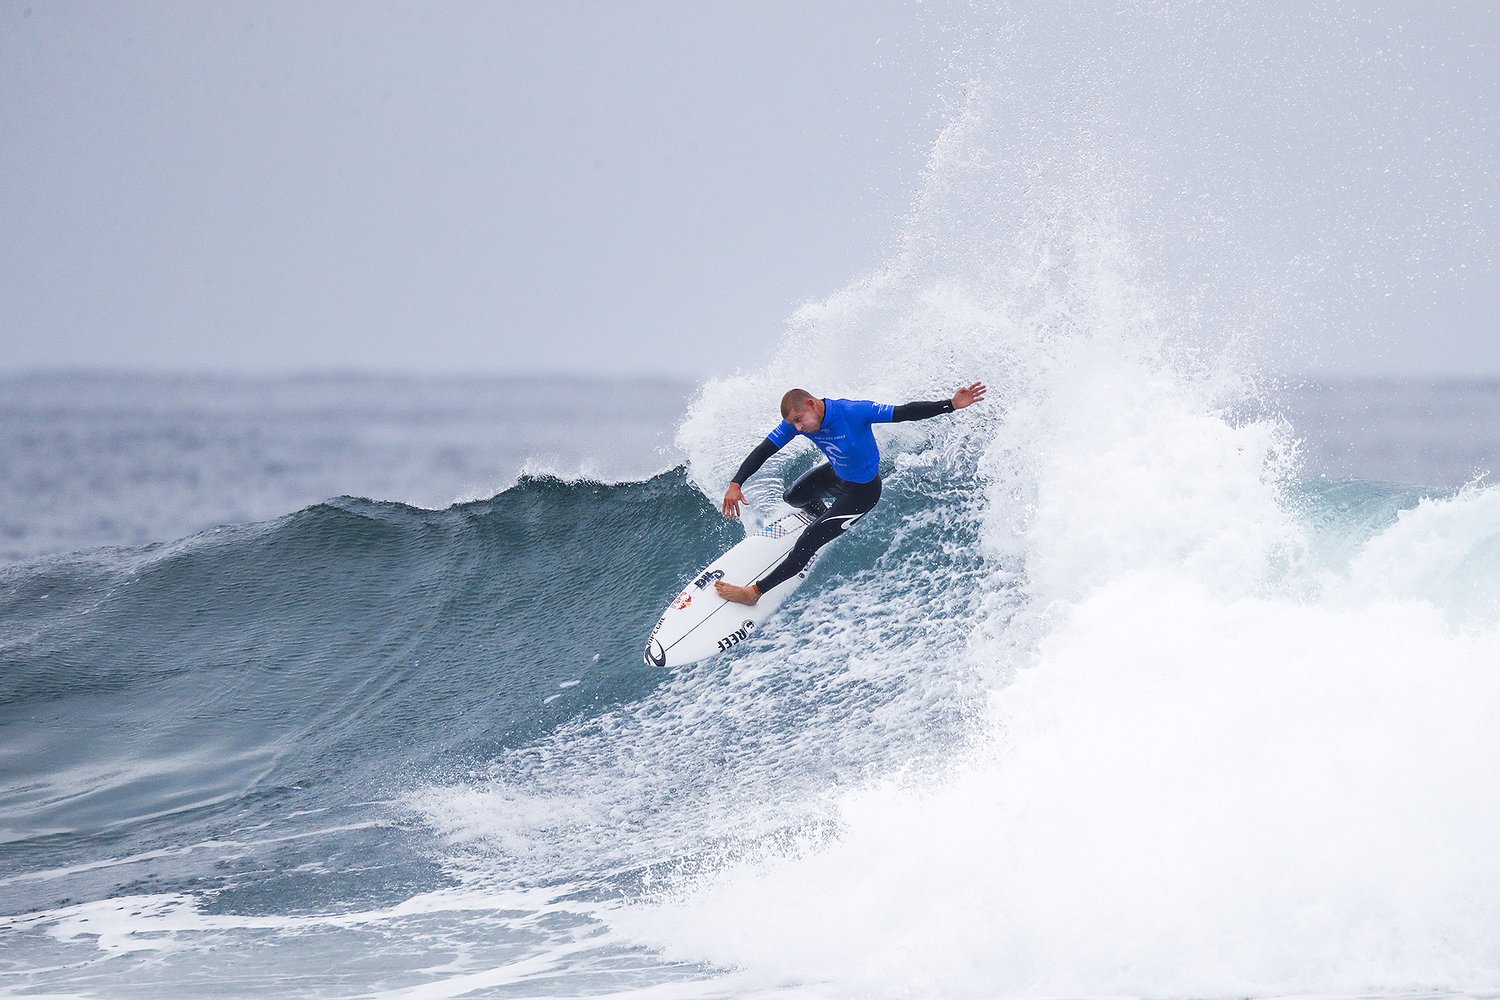 Mick Fanning of Australia placed second in Heat 1 of Round One at the Rip Curl Pro Bells Beach.